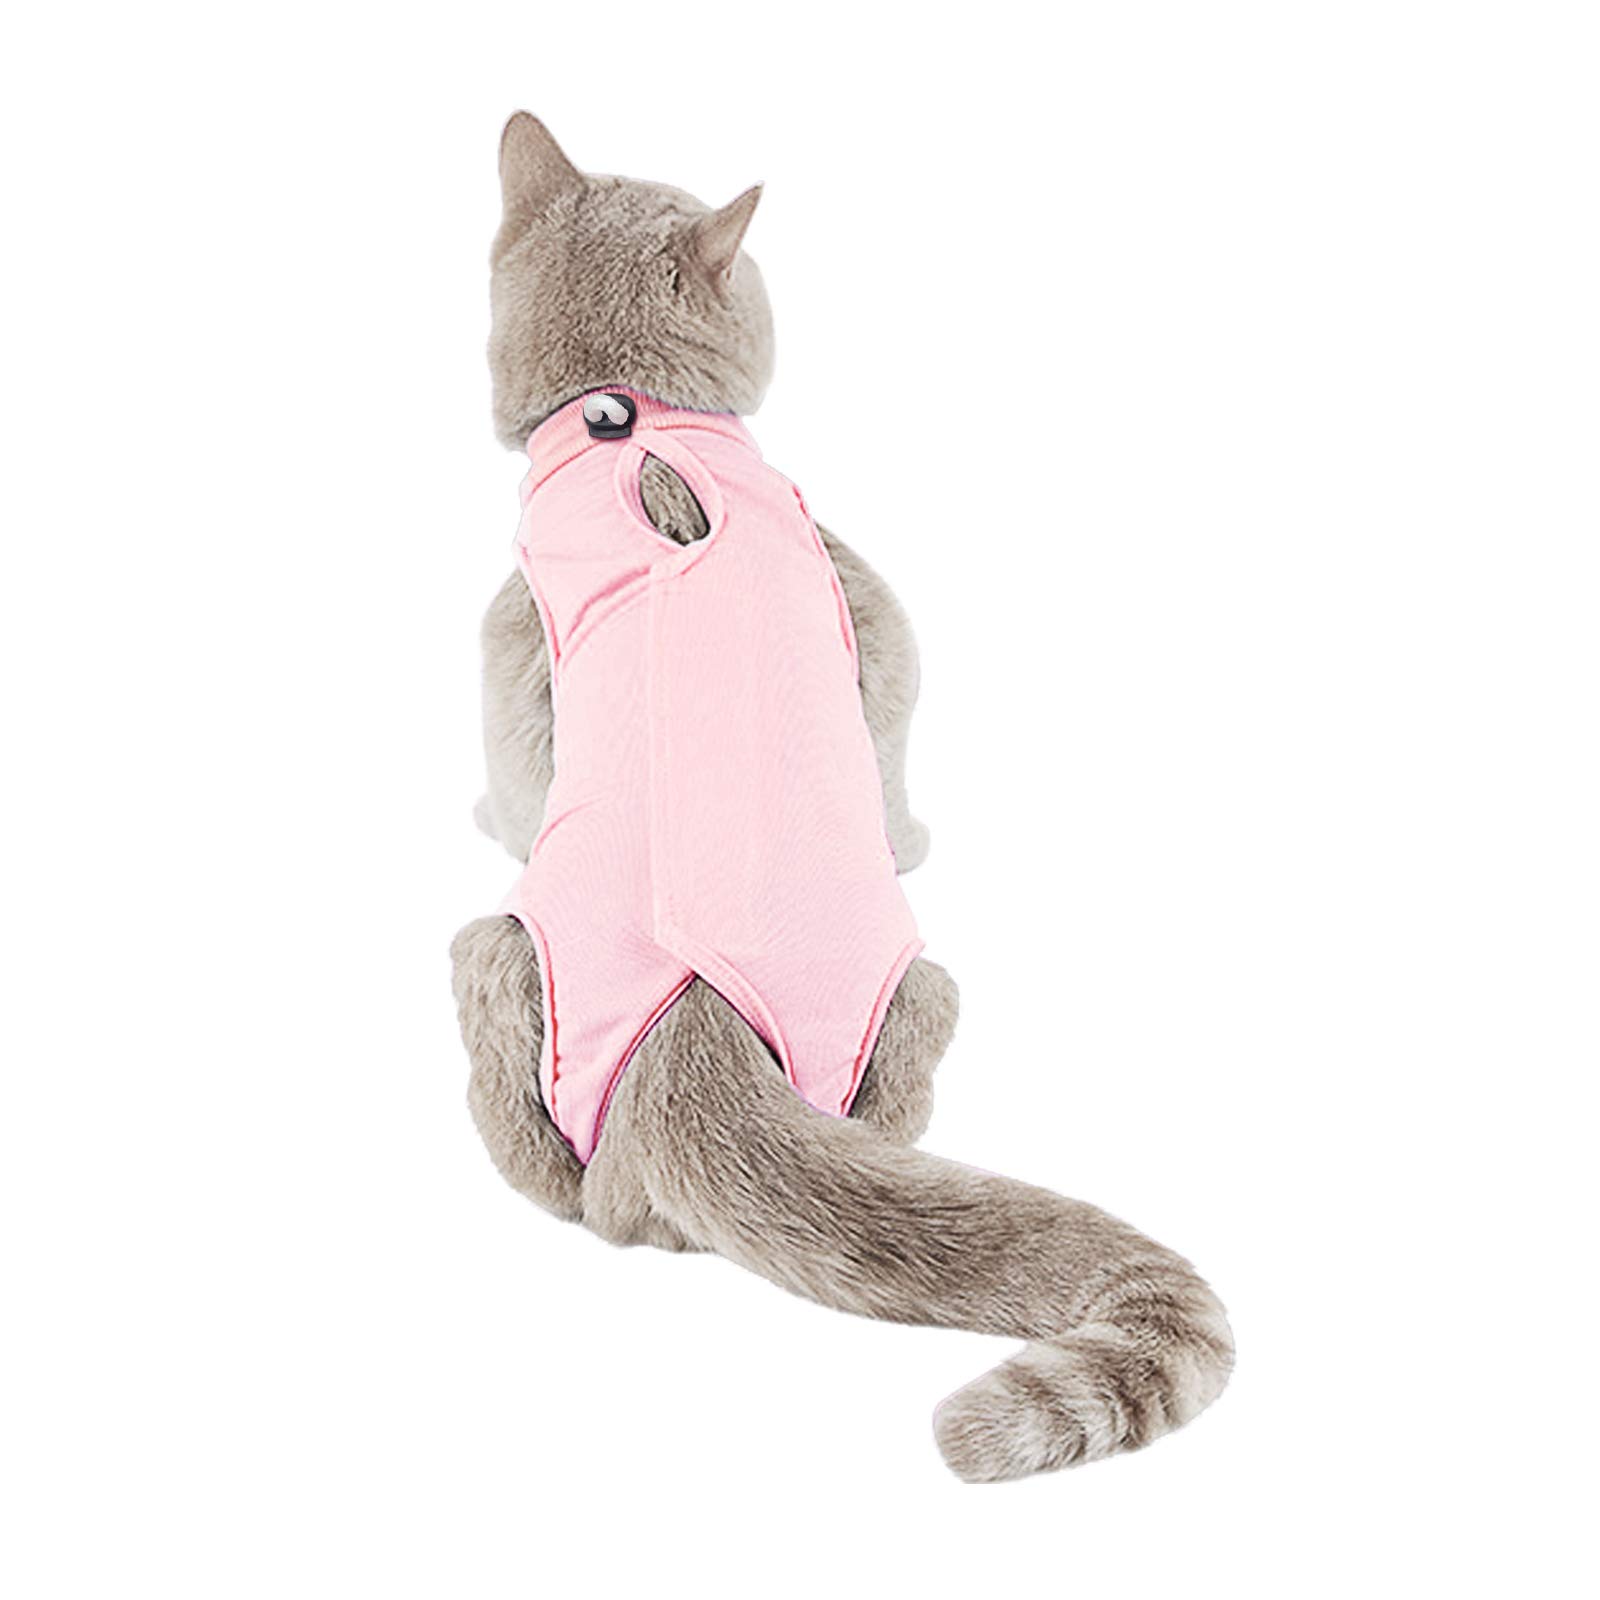 TORJOY Kitten Onesies,Cat Recovery Suit for Abdominal Wounds